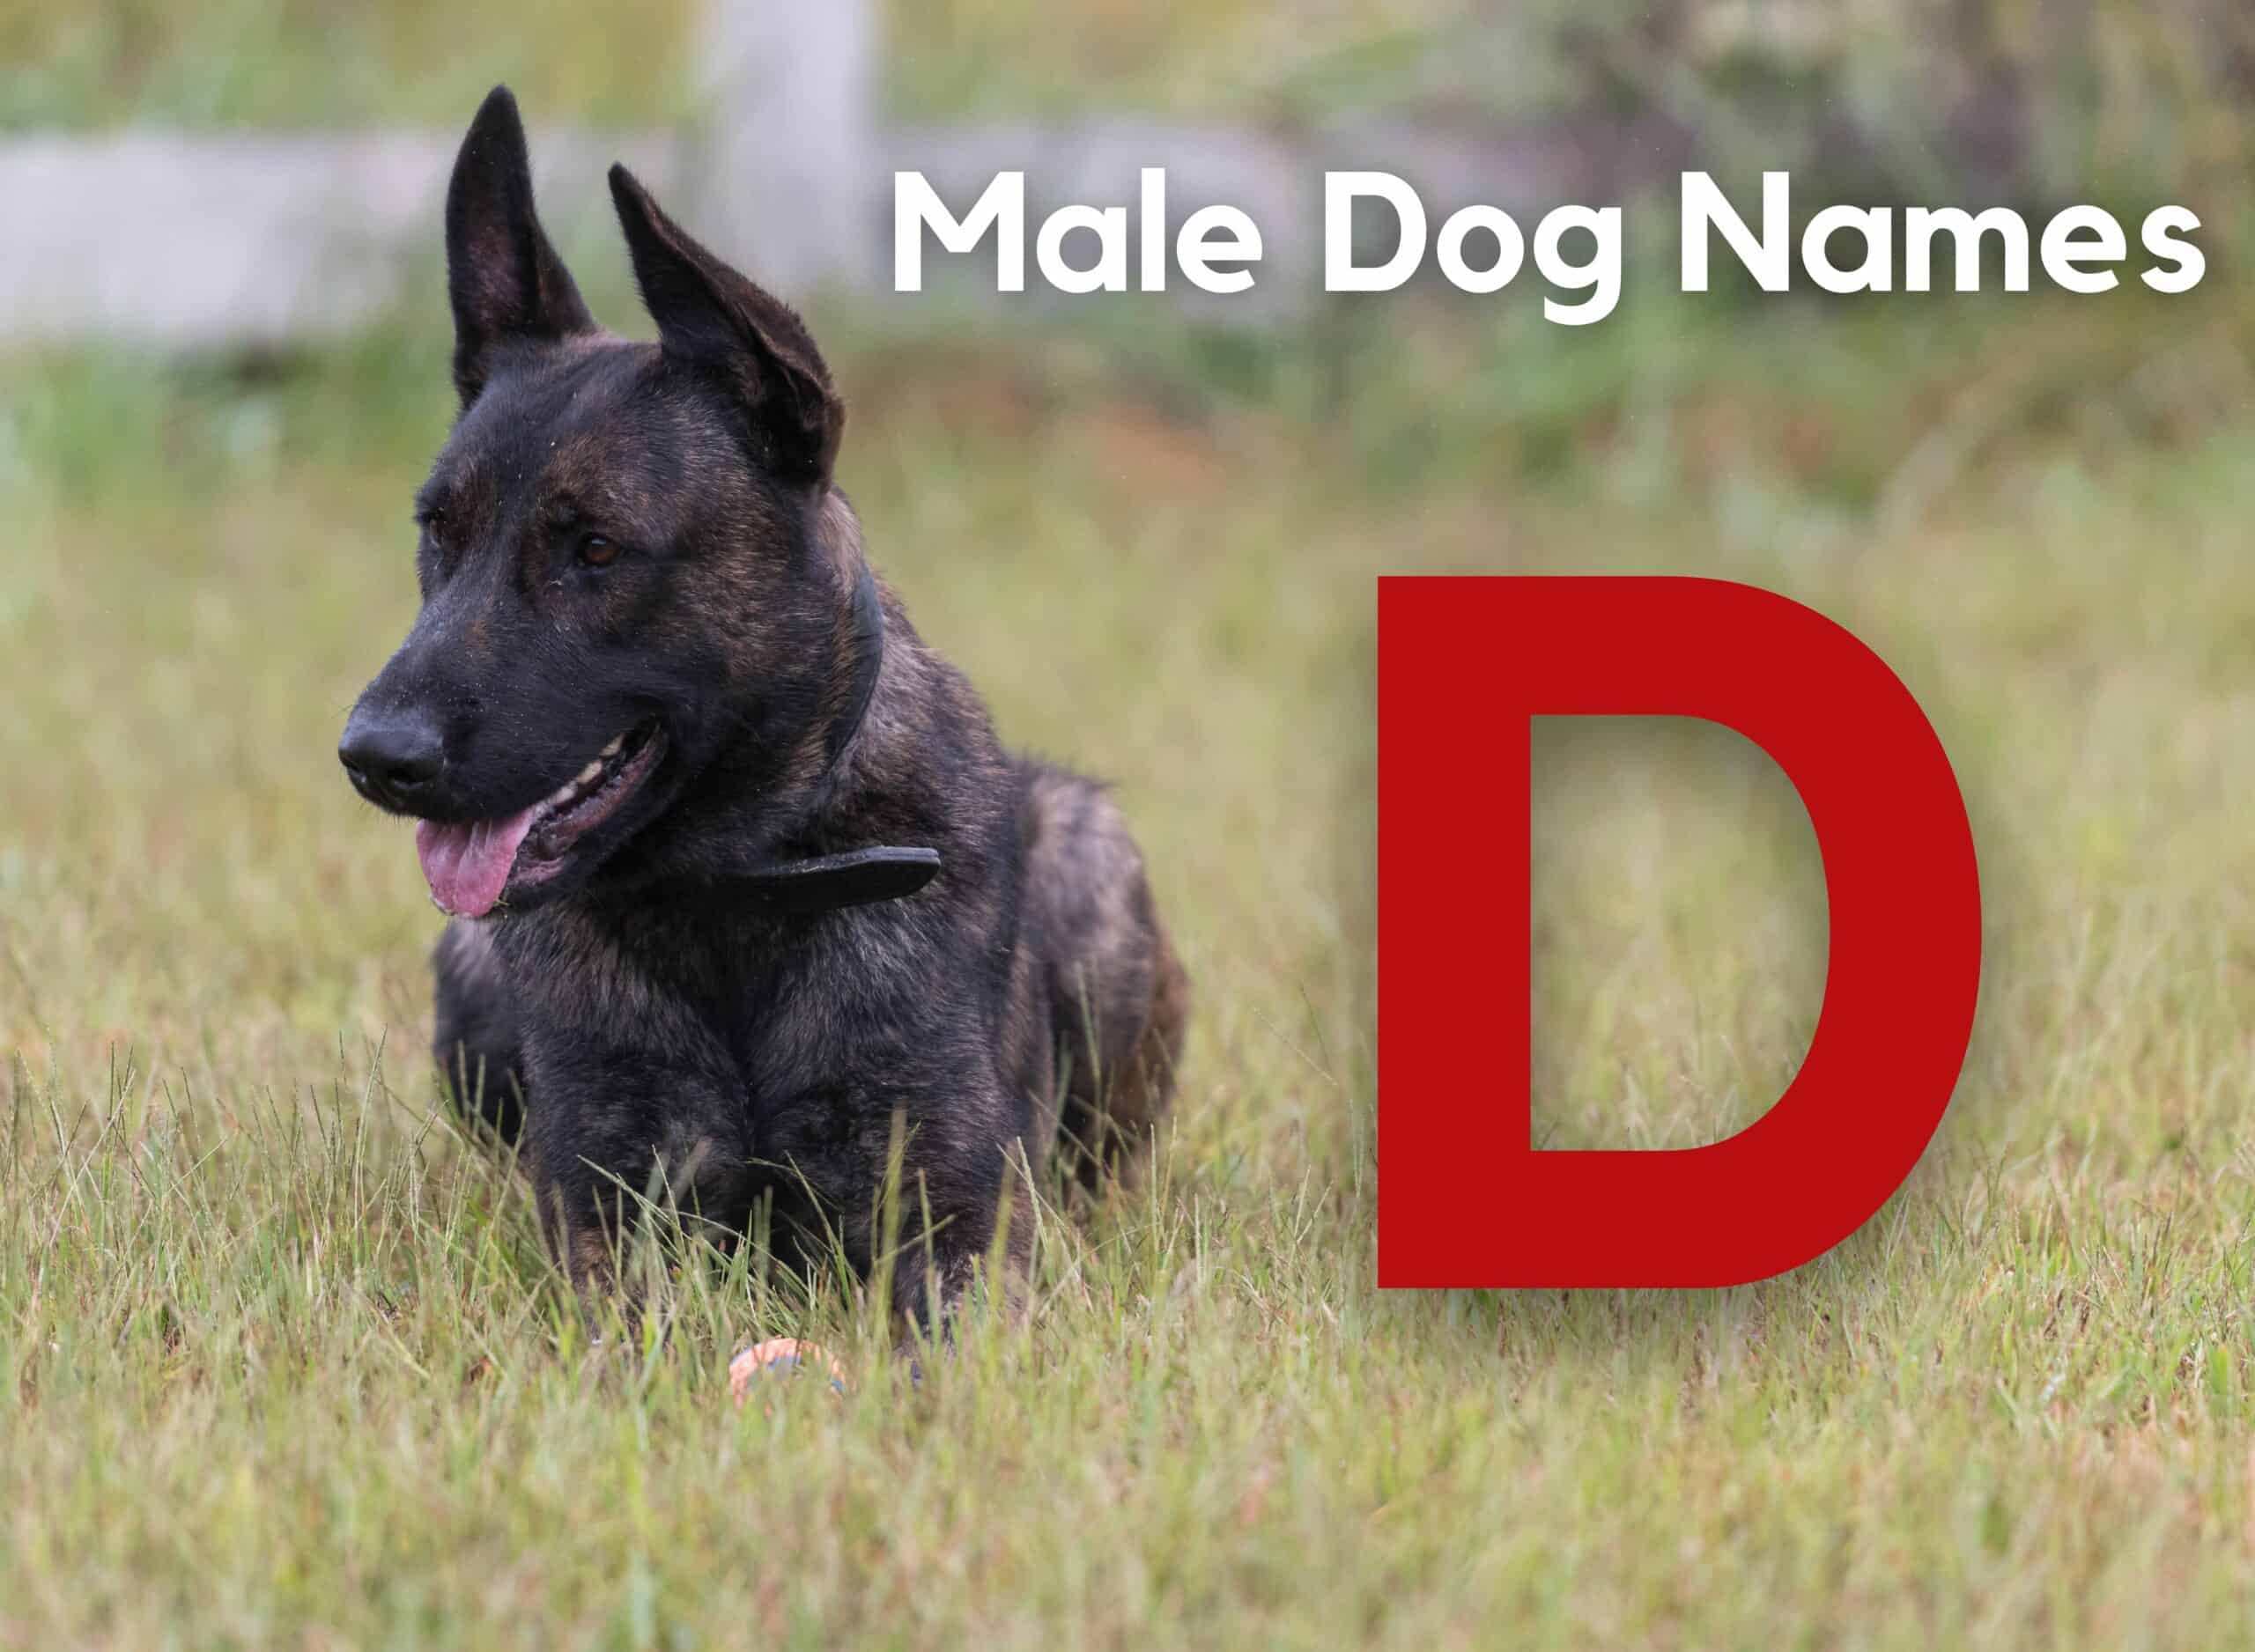 Male Dog Names - D